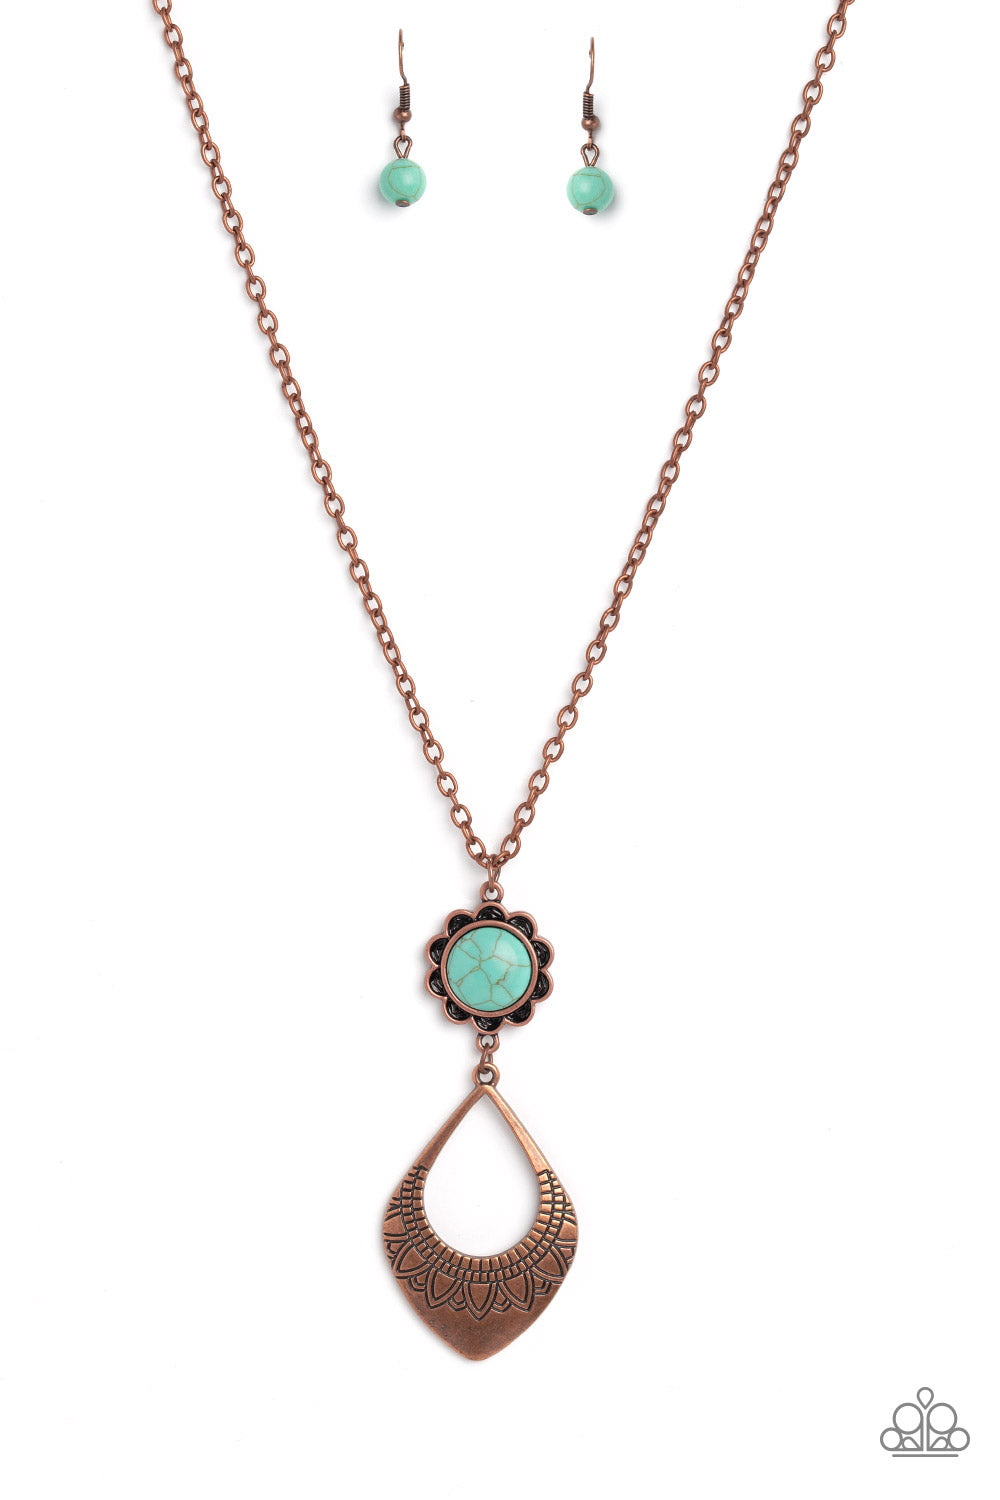 Stone TOLL Paparazzi Accessories Necklace with Earrings - Copper